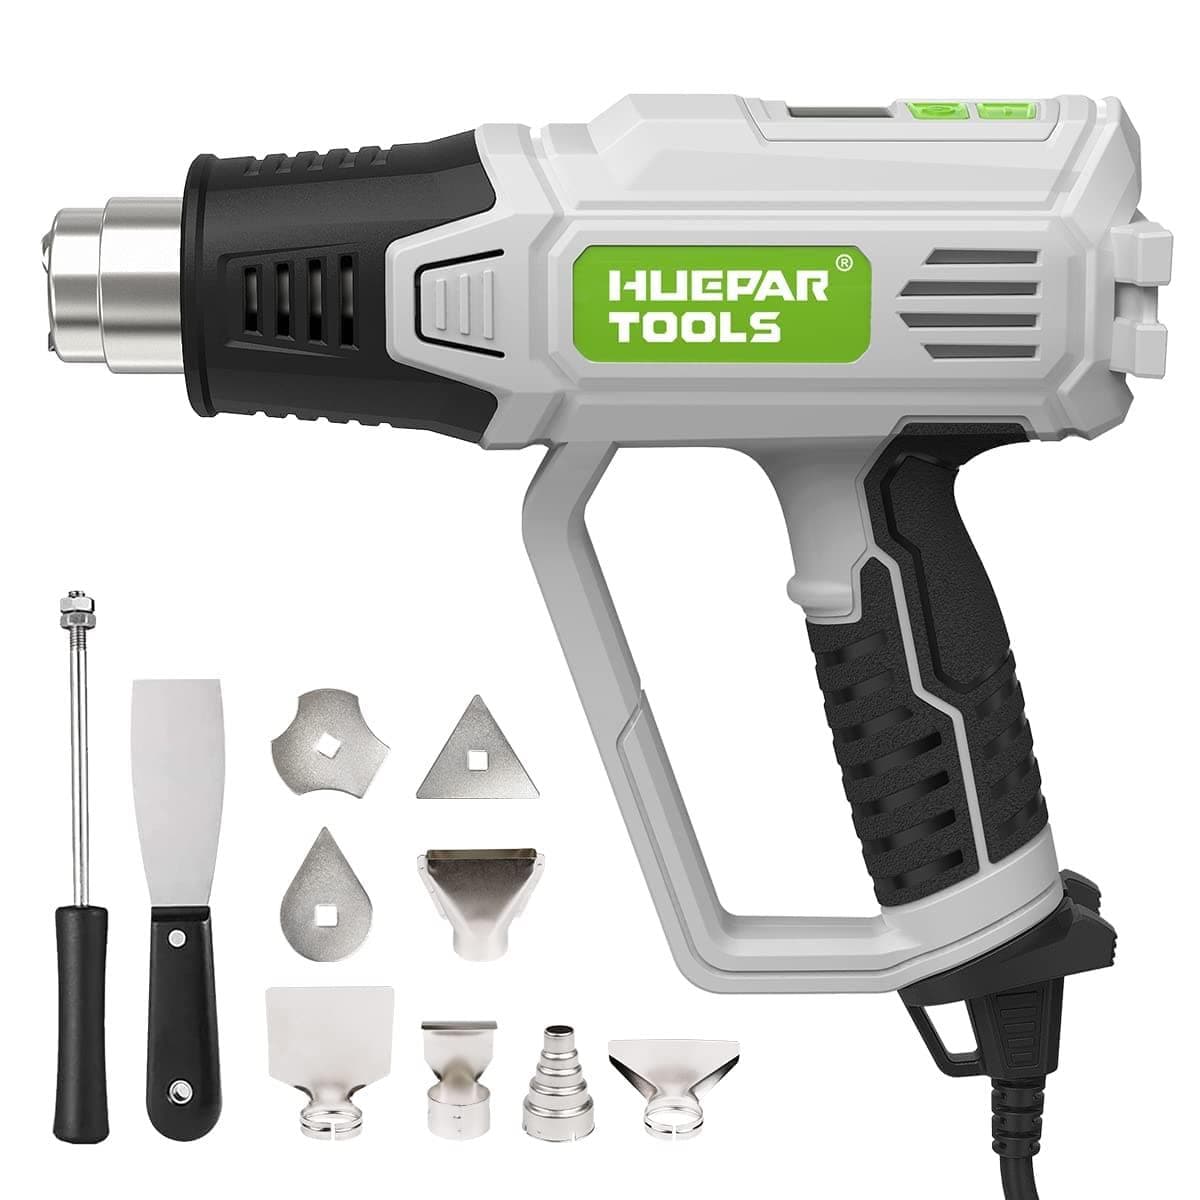 Huepar Tools SG800 HVLP Electric Paint Sprayer with 4 Metal Nozzles and 3 Patterns, 1300ml Capacity, for Interior and Exterior Walls, House Painting, Ceilings, Fences, Cabinets, and Chairs7